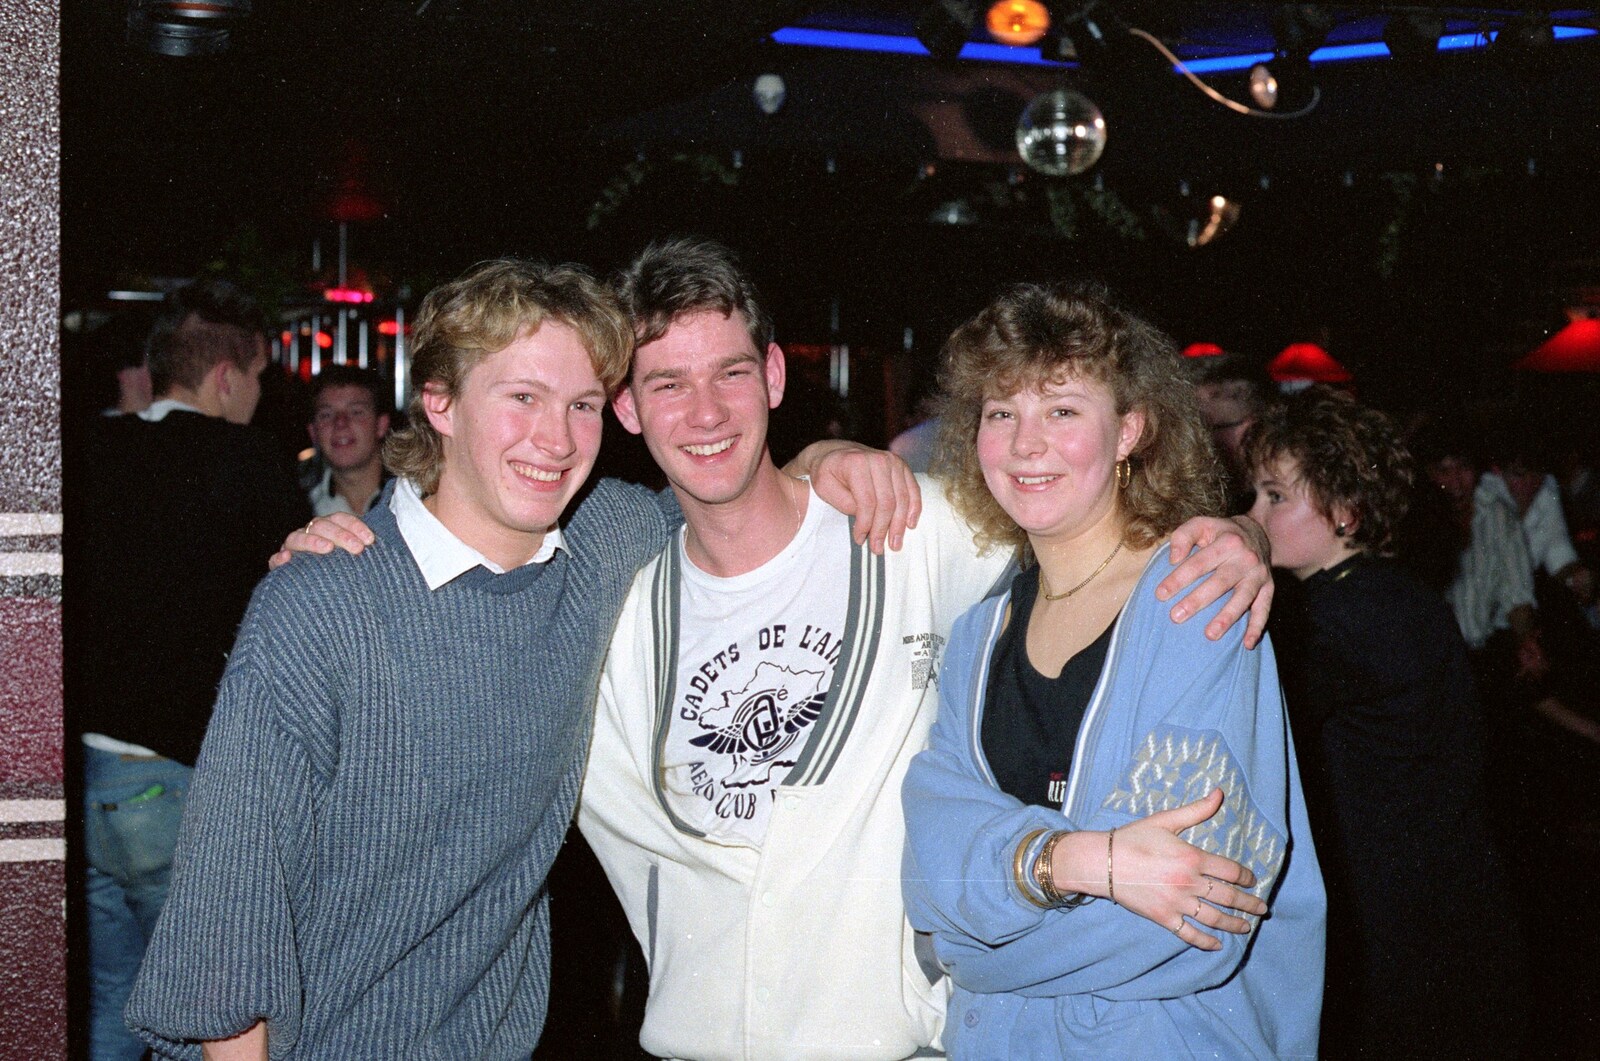 Malc's mates from Uni: A Party in Snobs Nightclub, Mayflower Street, Plymouth - 18th October 1986